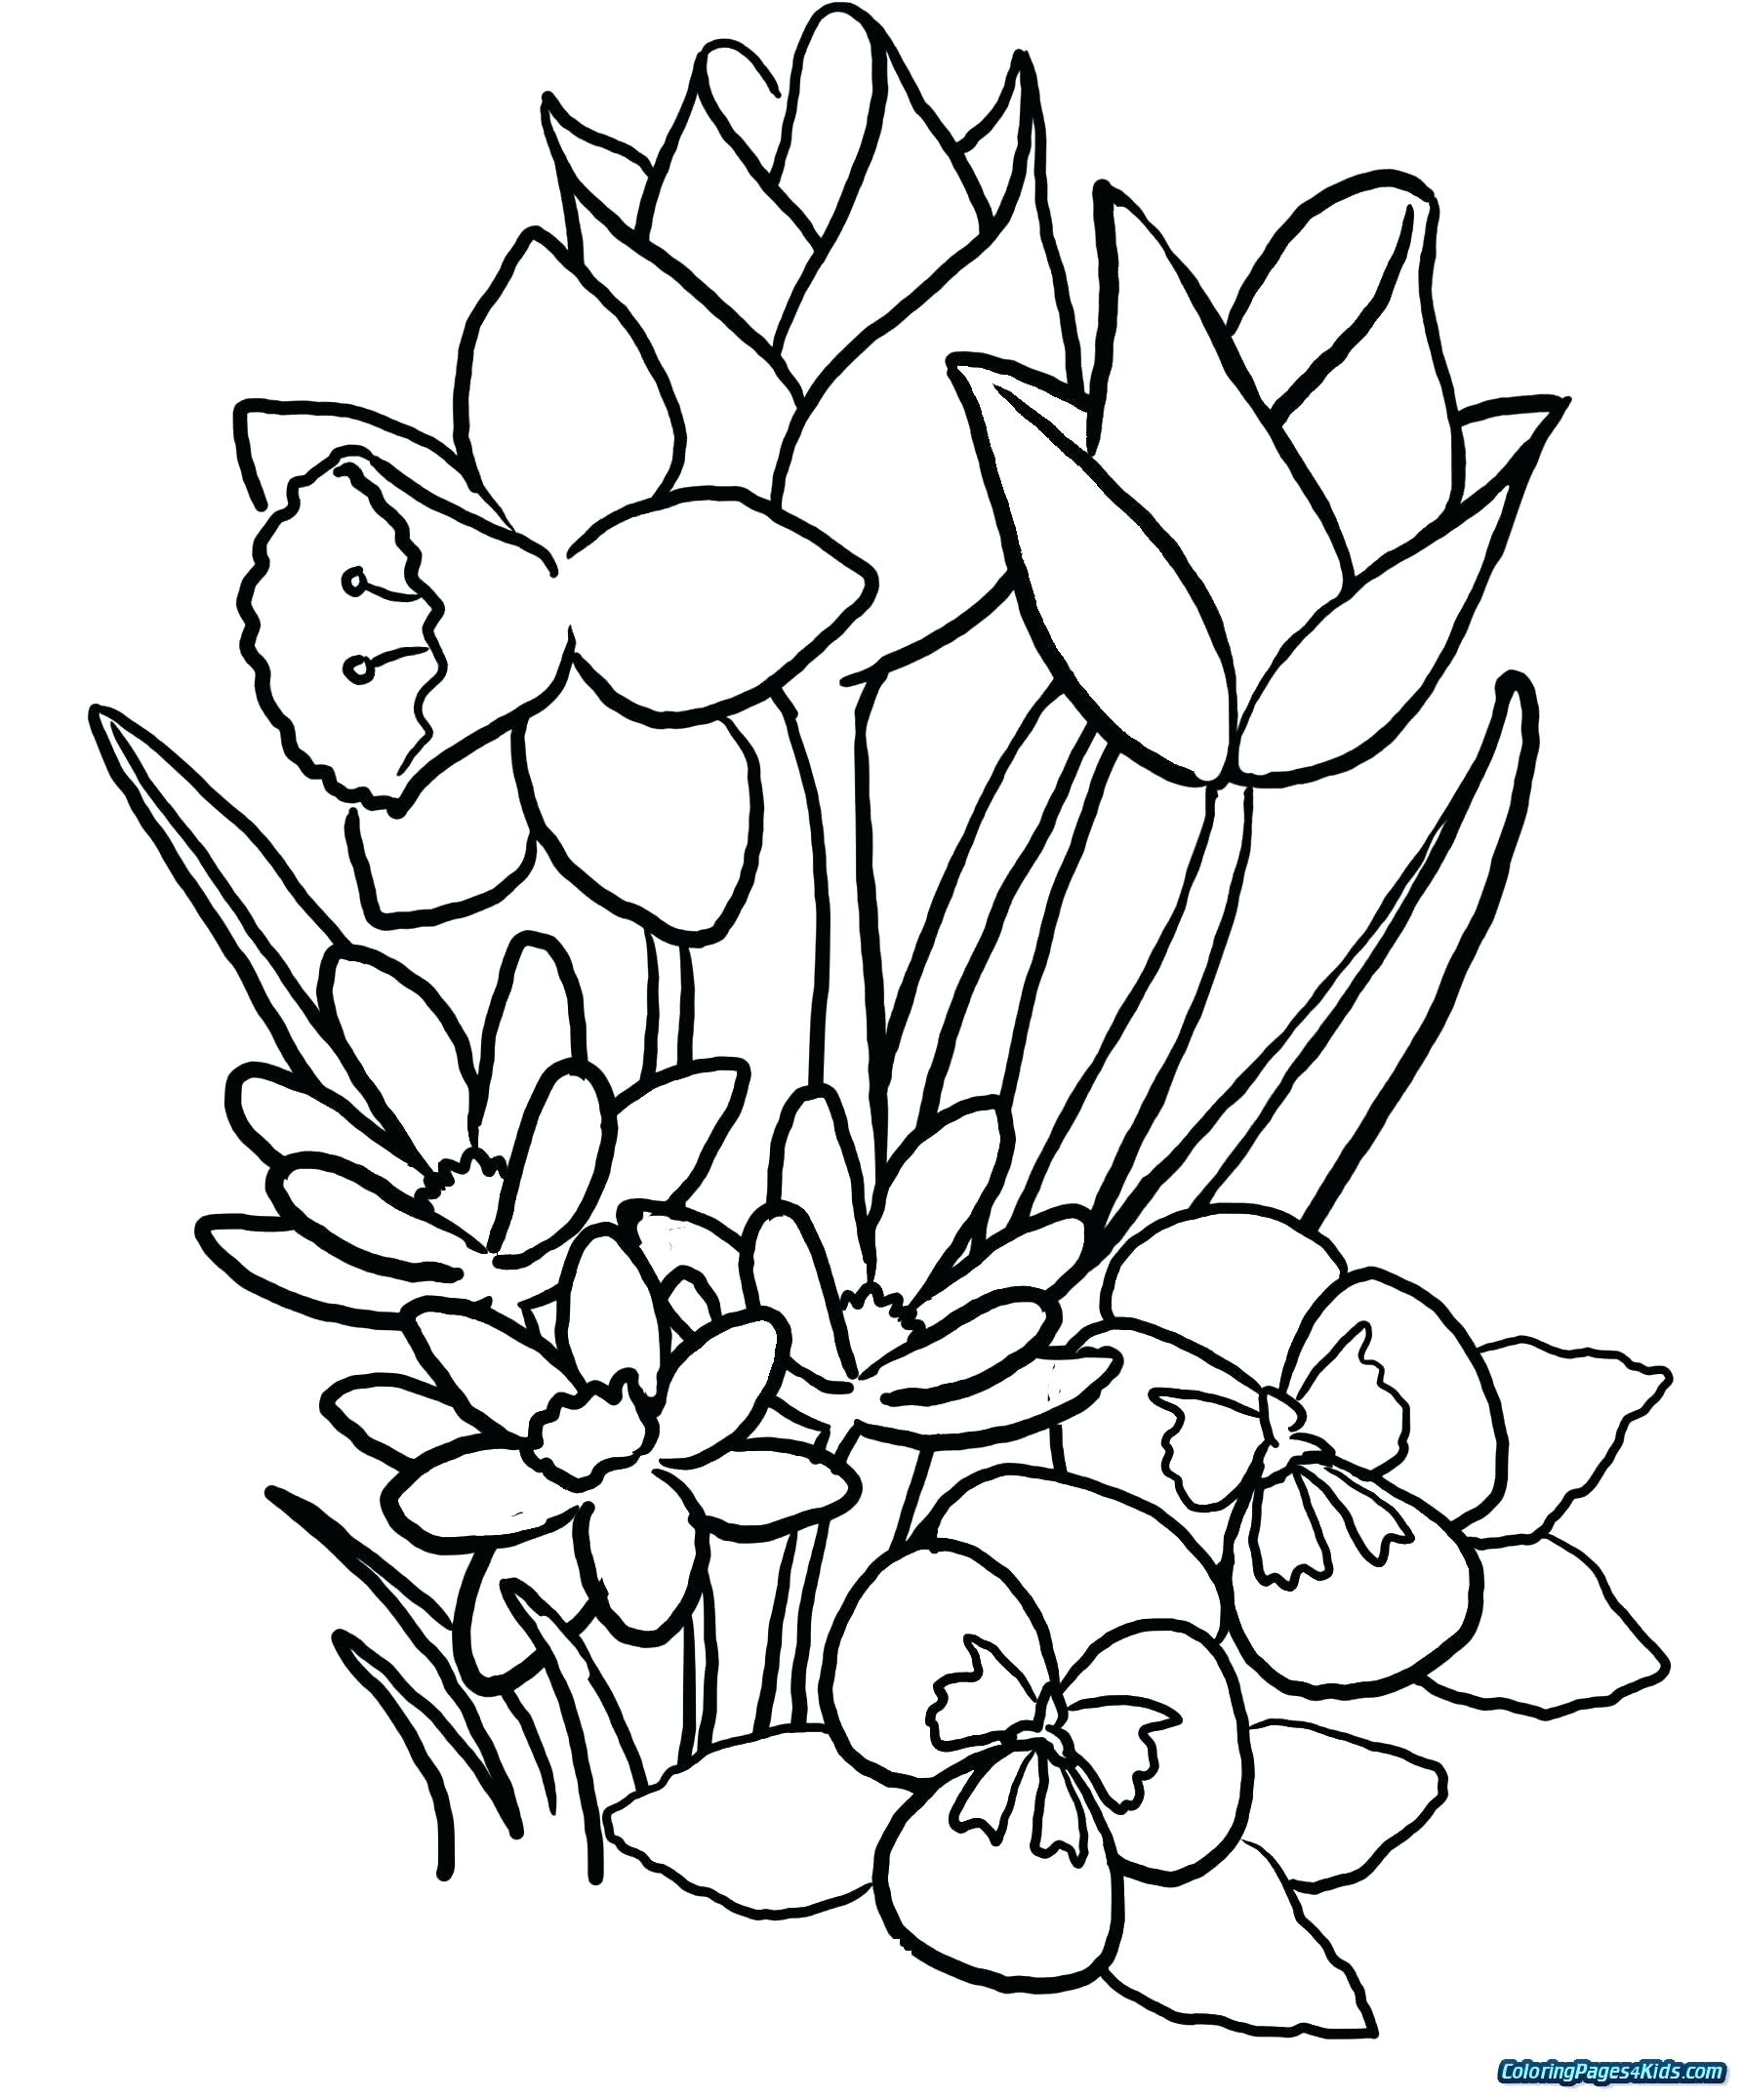 Bouquet Of Flowers Coloring Page Flower Bouquet Coloring Page Chamberprintco